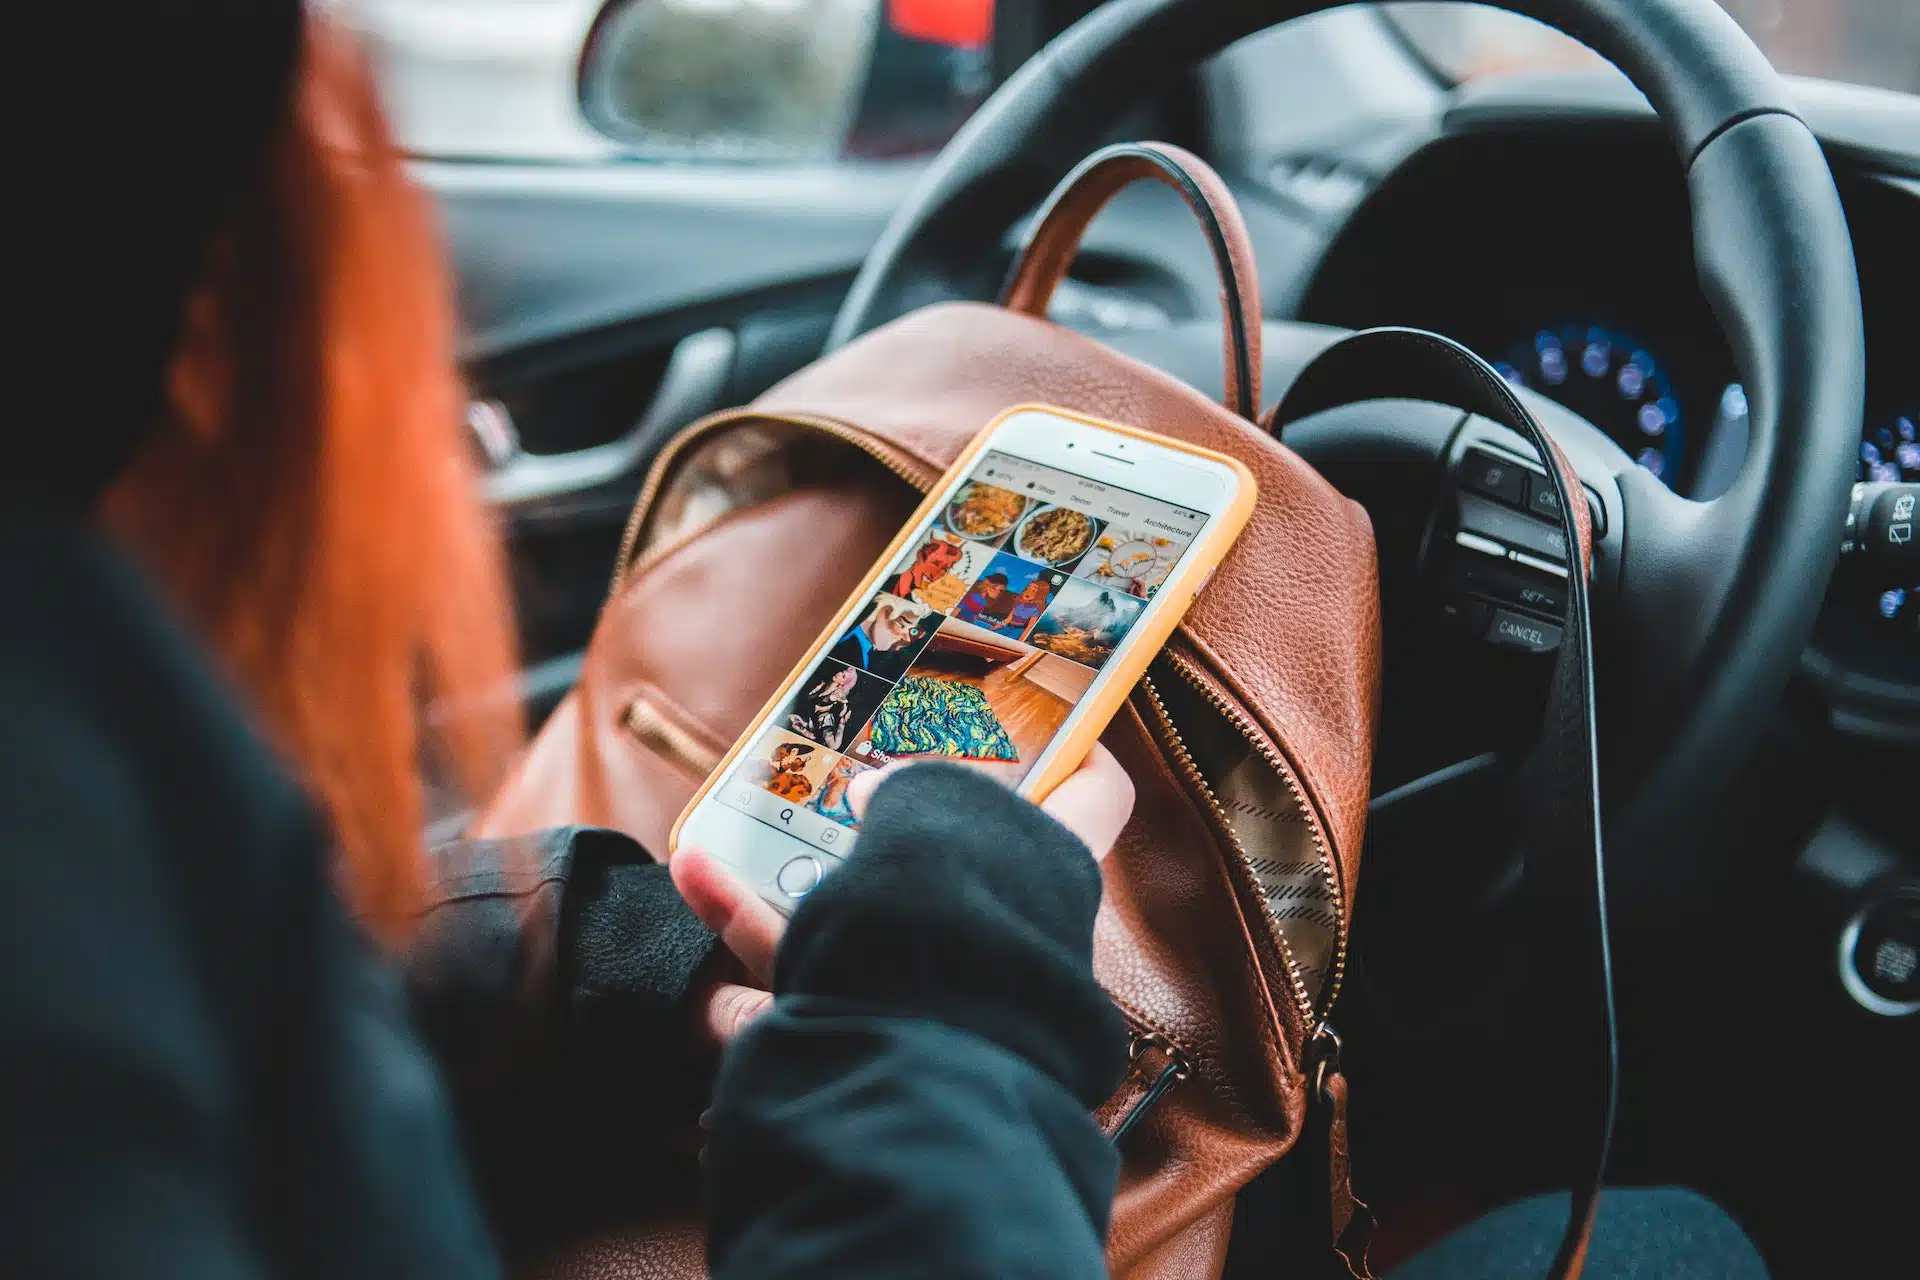 Read this blog to learn more about car technology and work apps every freelancer must have.